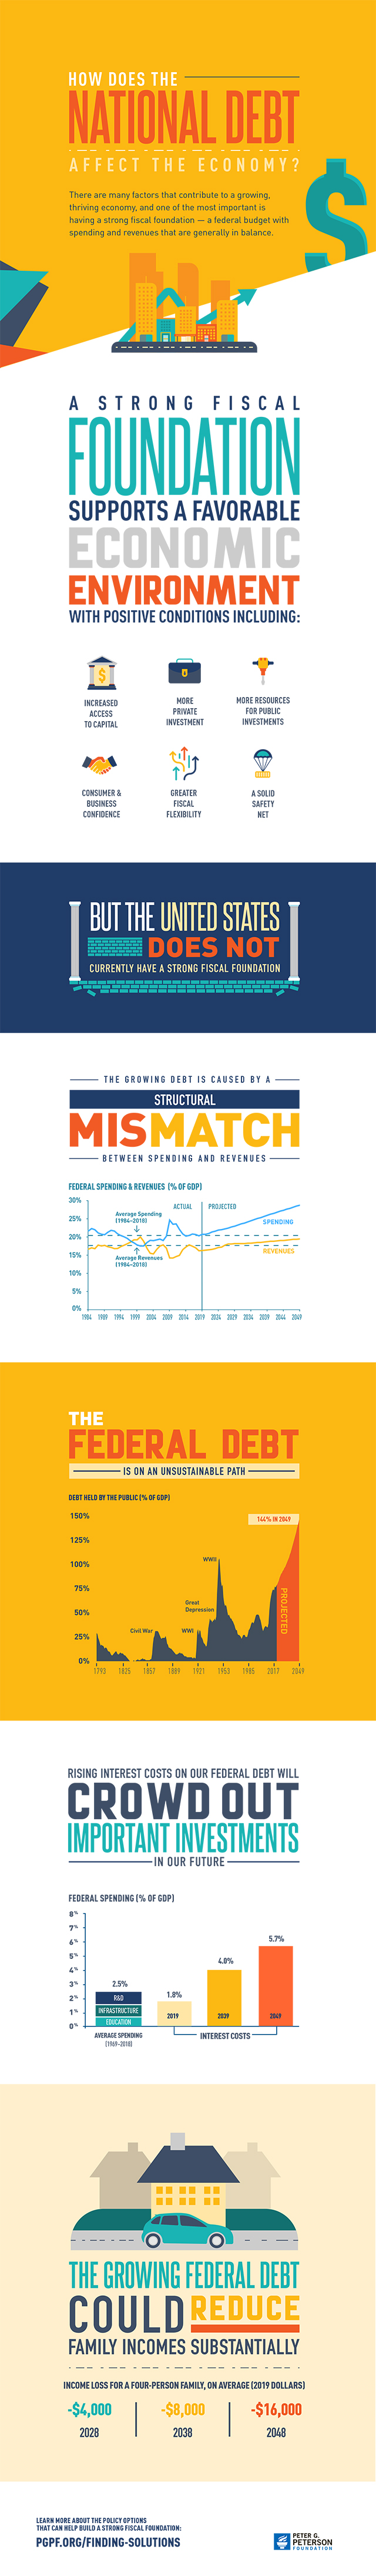 Infographic: How Does the National Debt Affect the Economy?